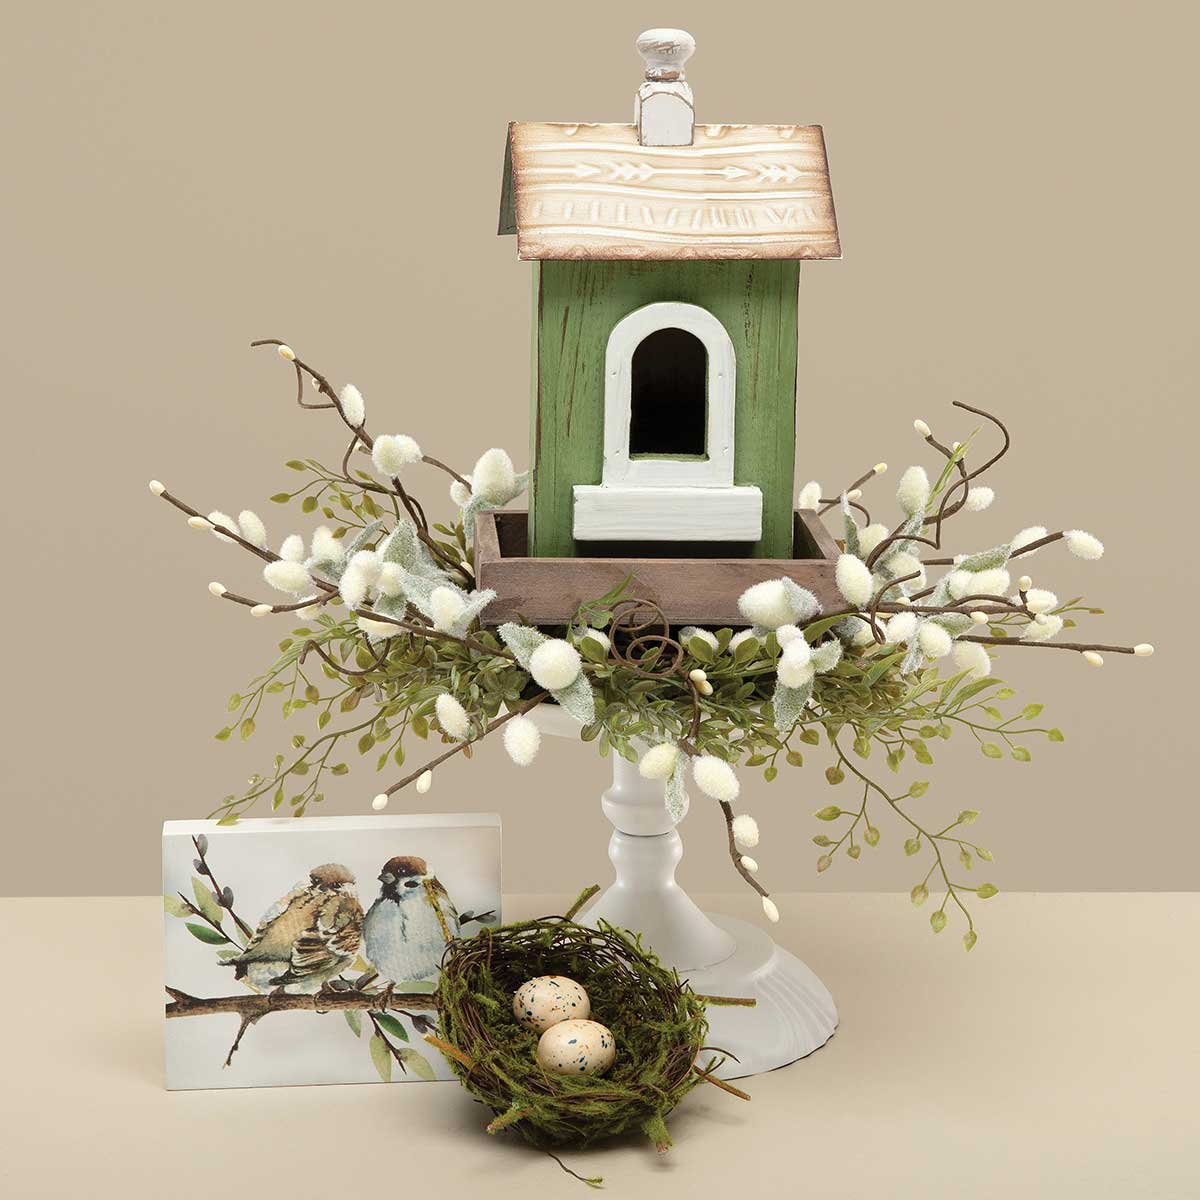 BIRDHOUSE MEADOW GREEN 5.5IN X 4.75IN X 8.5IN METAL/WOOD - Click Image to Close